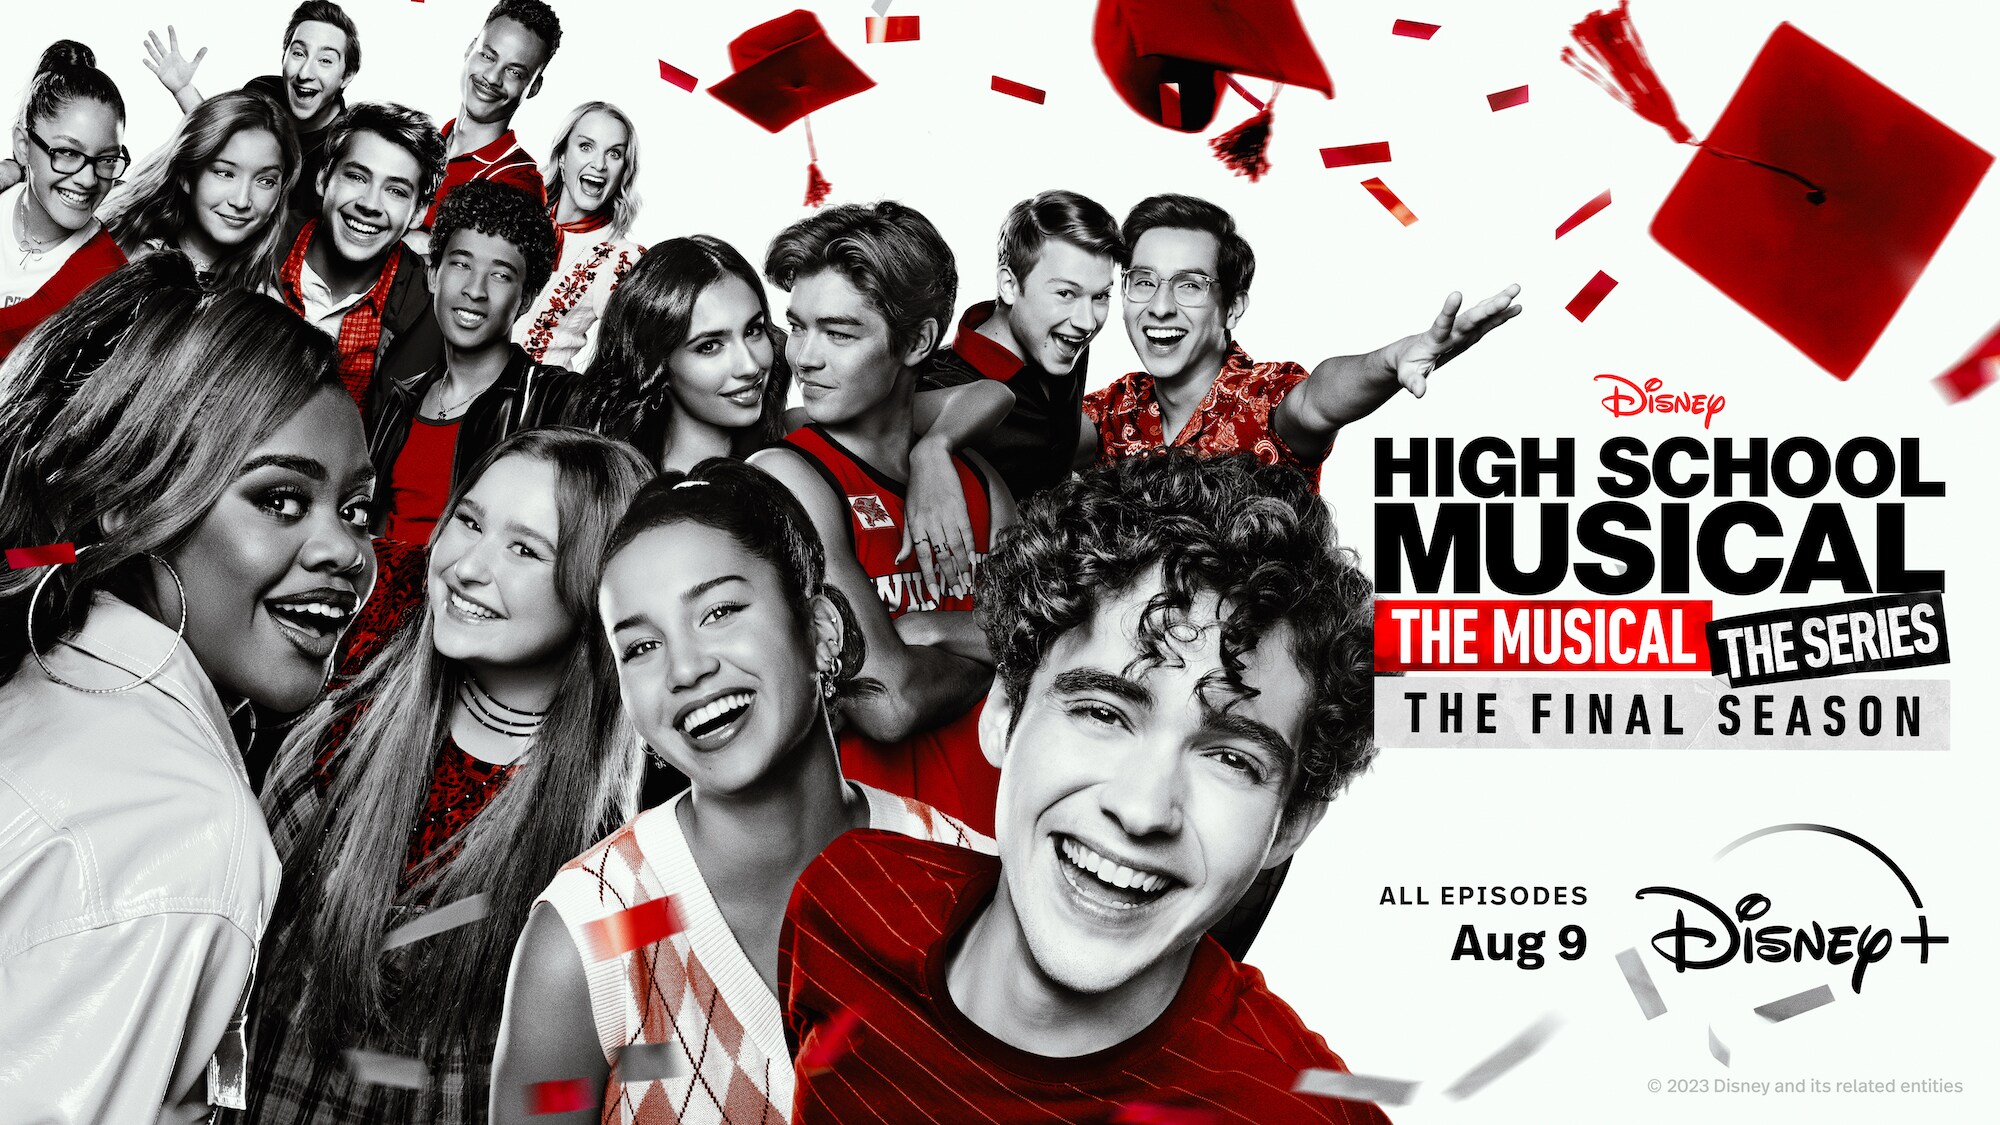 It\'s Now Or Never! Disney+ Reveals Official Trailer Of “High School  Musical: The Musical: The Series” Season Four Ahead Of Highly Anticipated  August 9 Premiere | Disney Plus Press